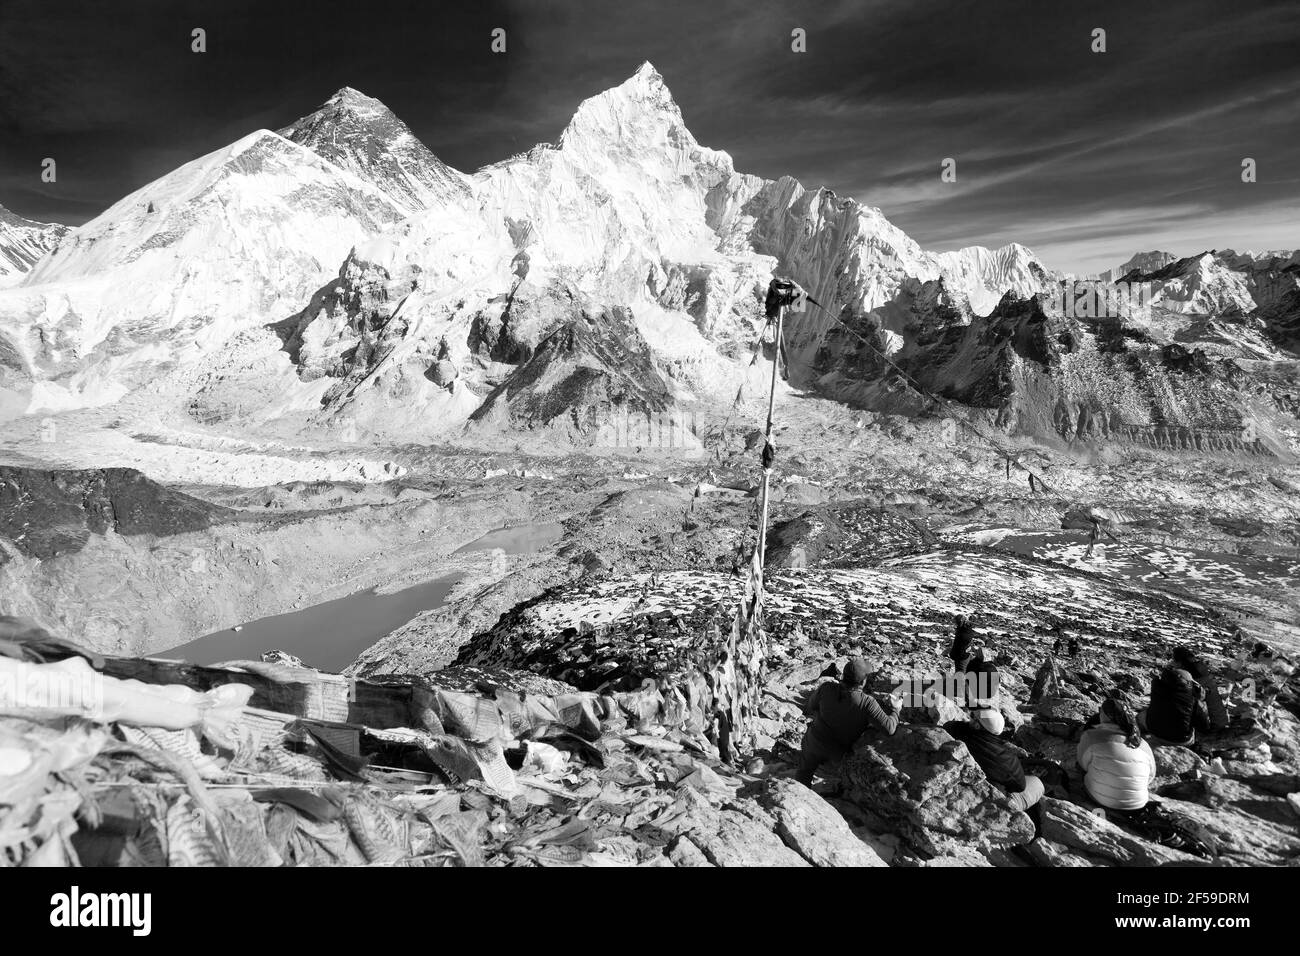 View of mount Everest, Lhotse and Nuptse with prayer flags and tourists from Kala Patthar black and white, Khumbu valley, Nepal Himalayas mountains Stock Photo